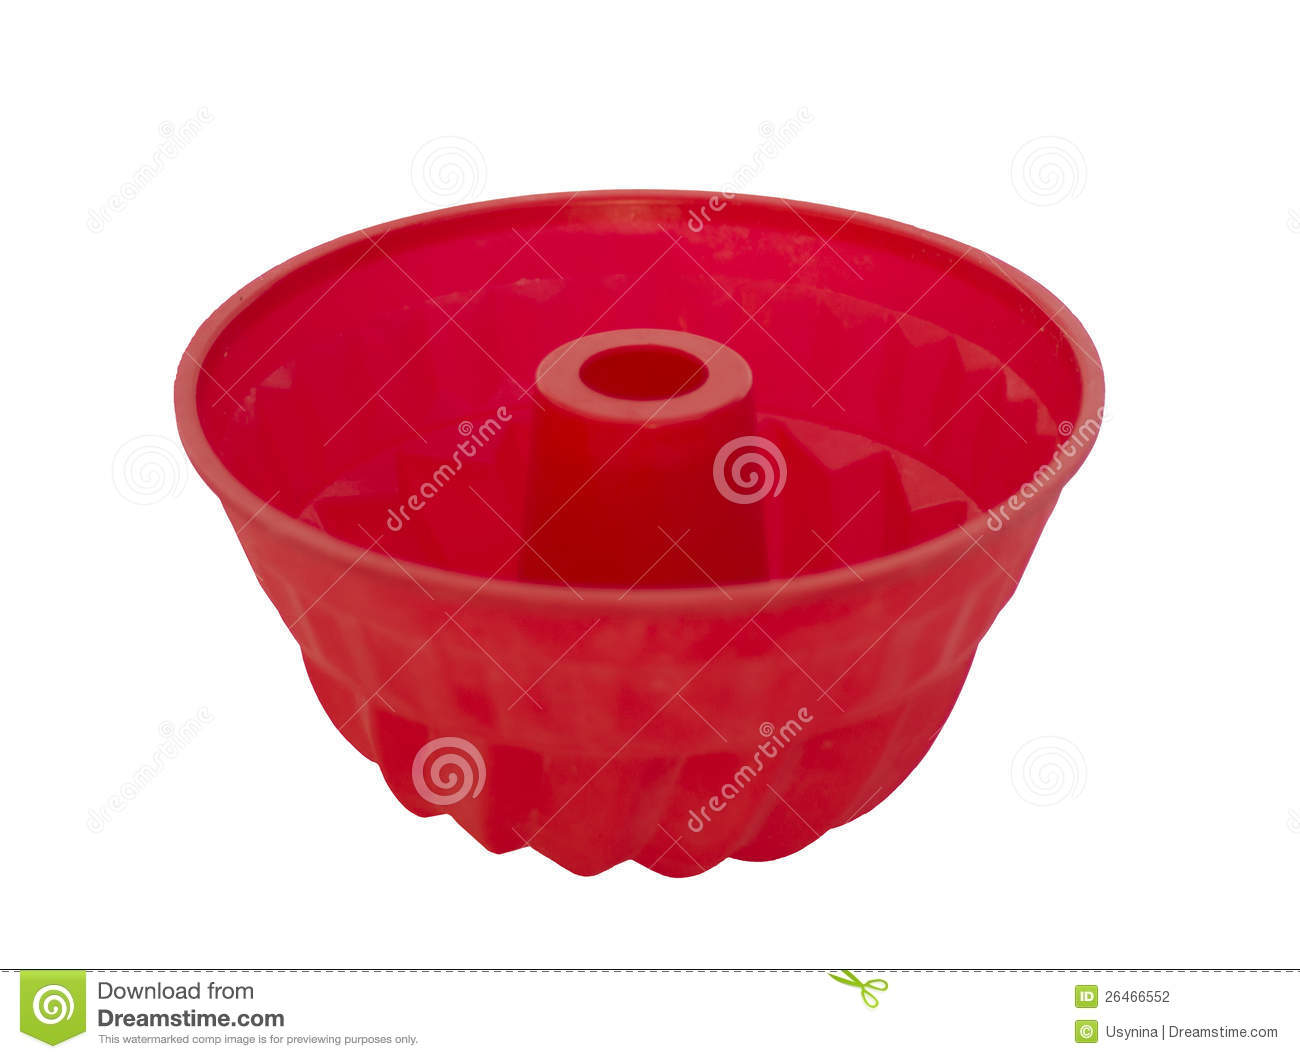 Red Silicone Baking Dish Stock Photography   Image  26466552